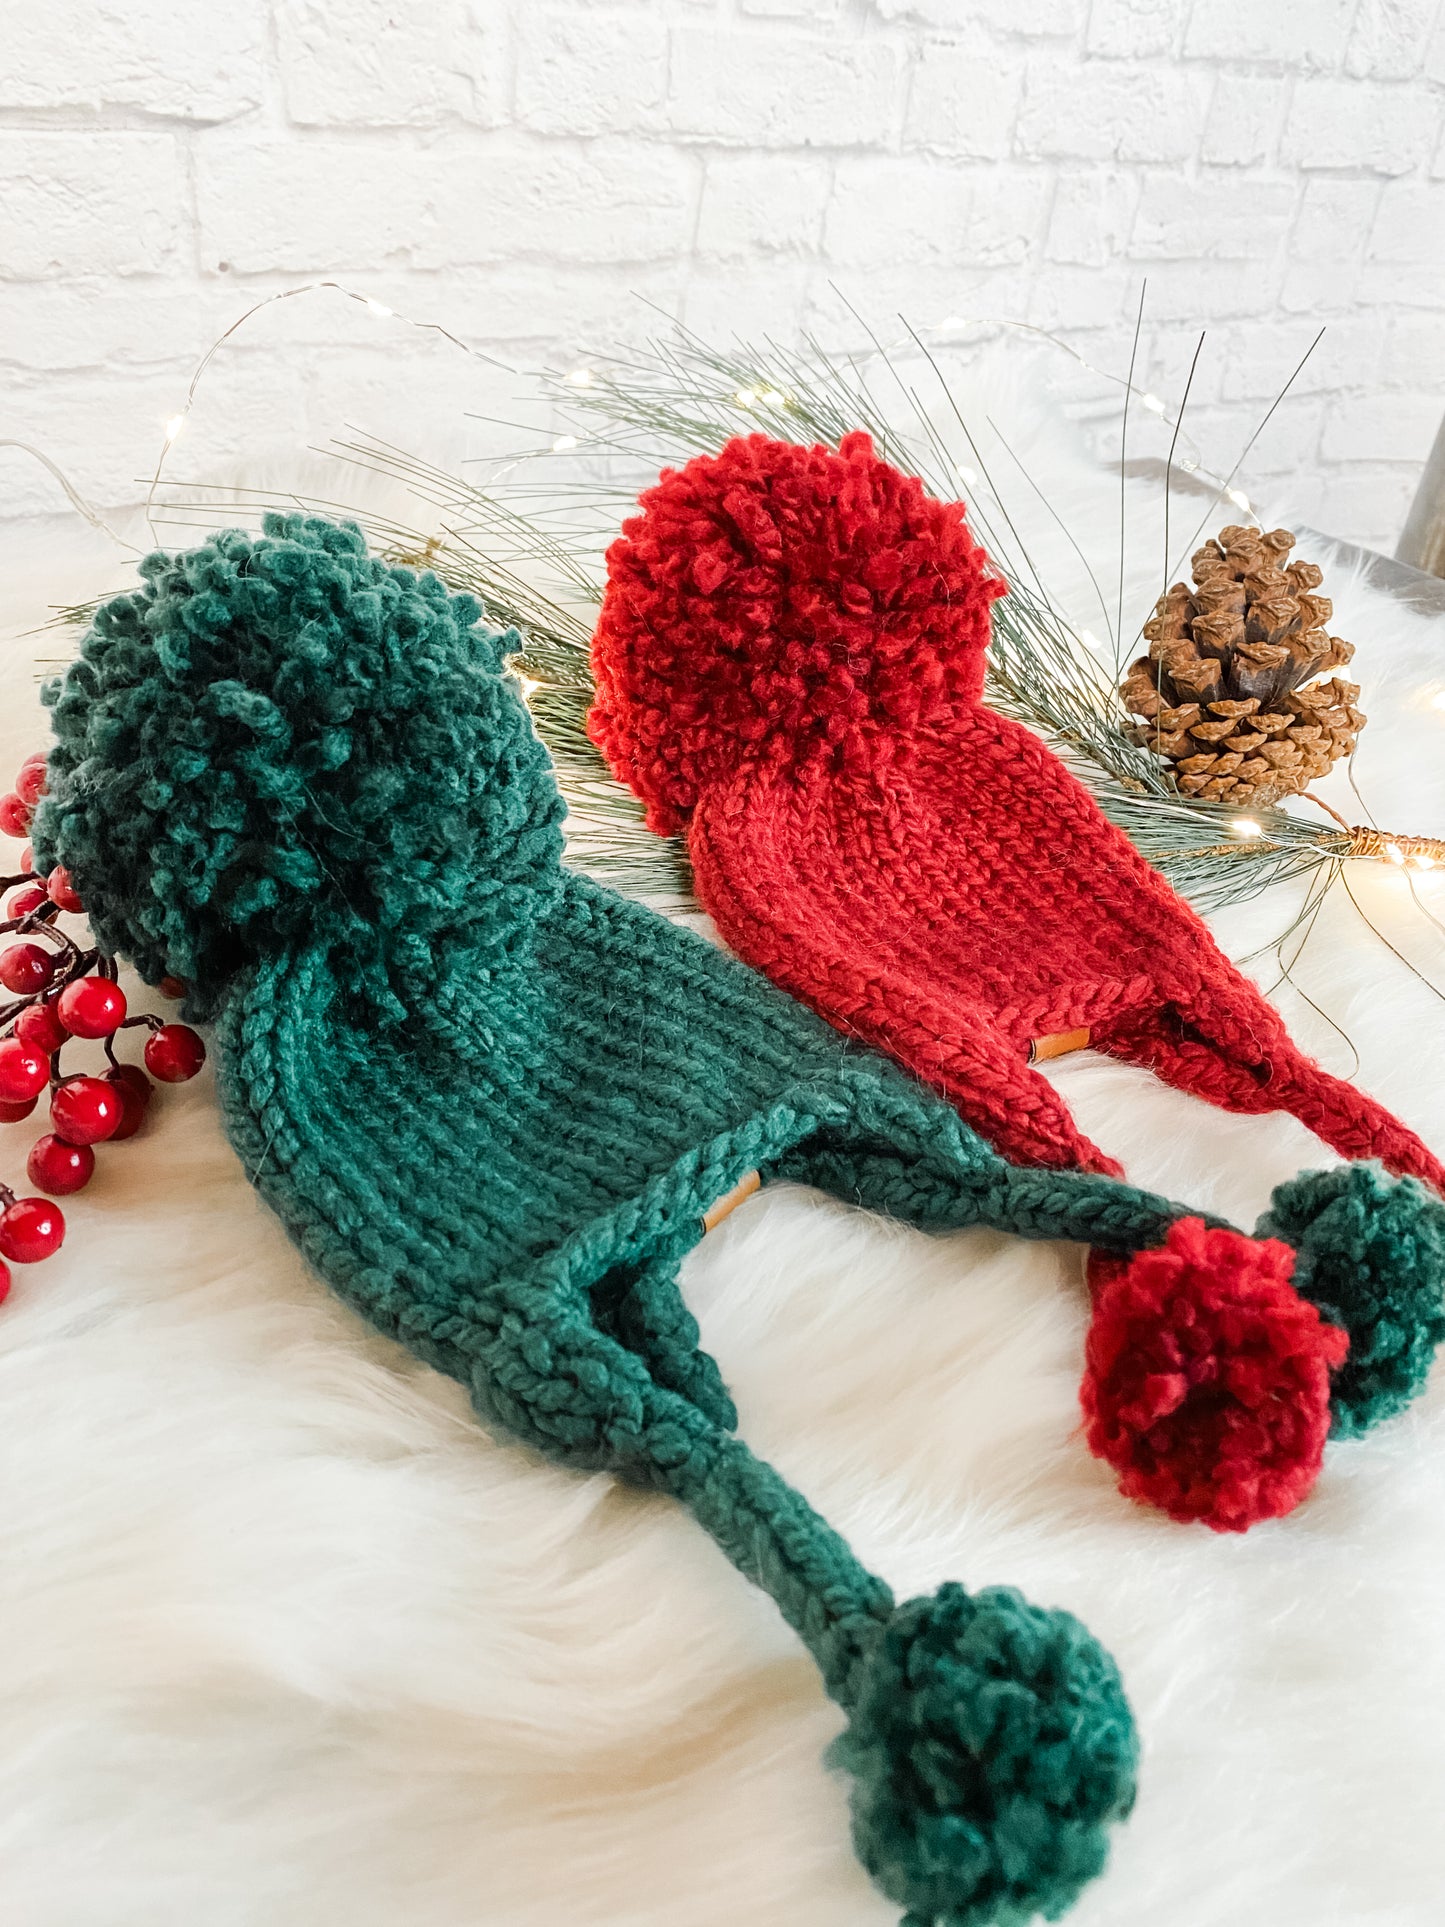 Knitted Christmas Hat Set in Red and Green, Sibling Set for Babies and Kids, Holiday Family Photo Prop